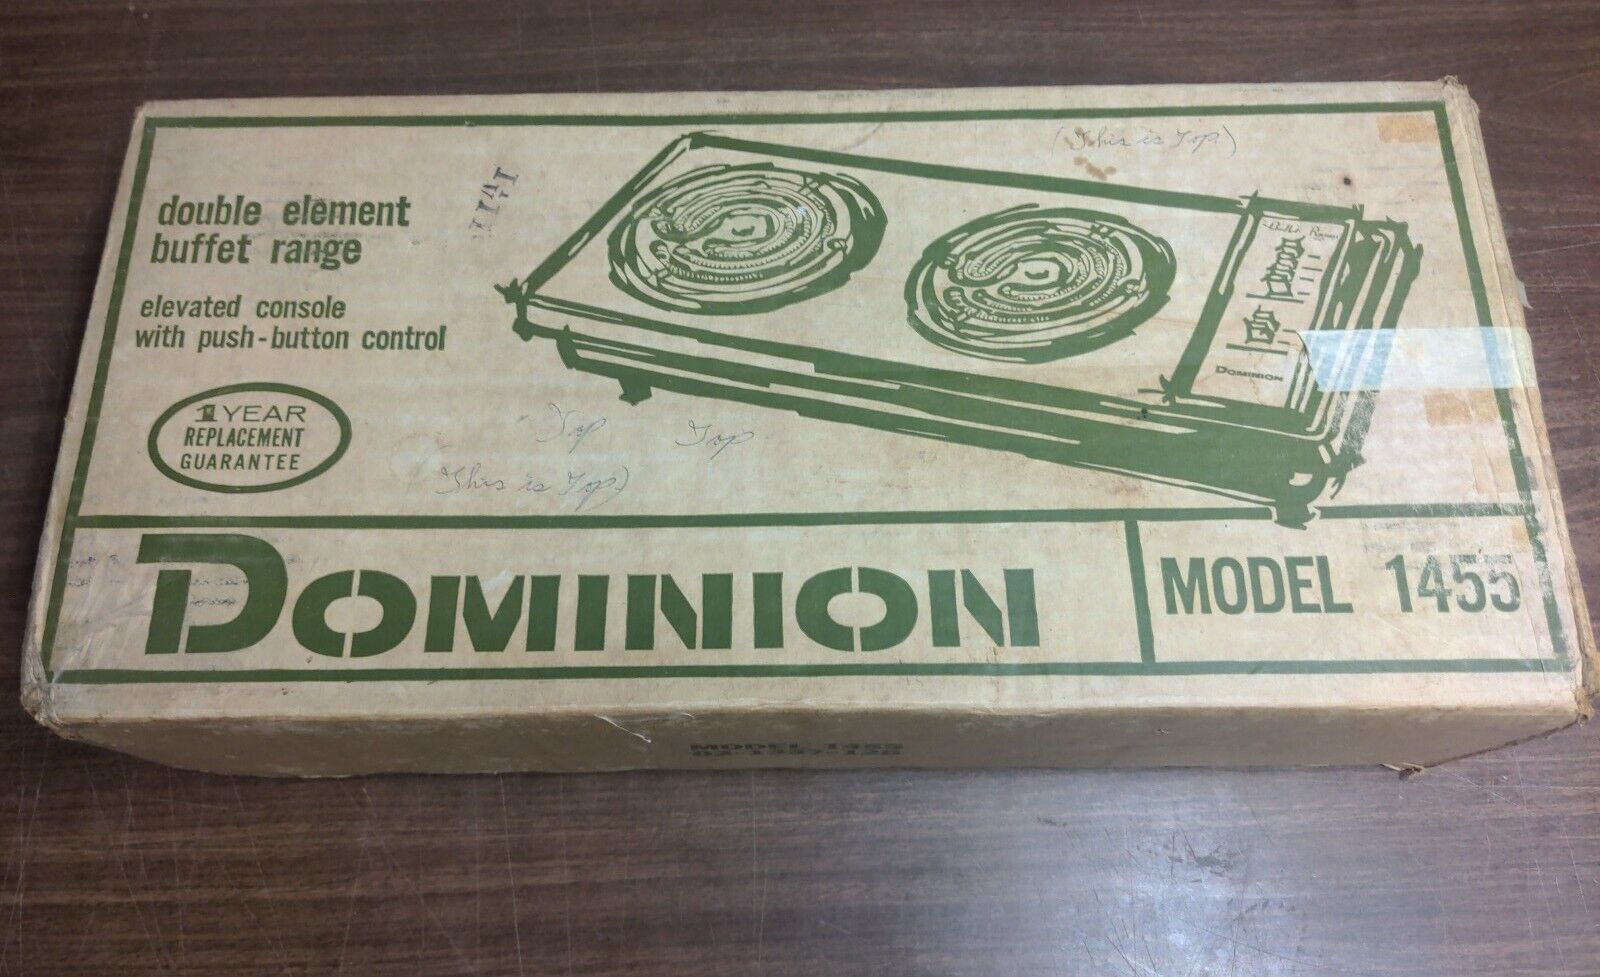 Vintage 1966 Dominion Model 1455 Double Element Electric Buffet Range In box